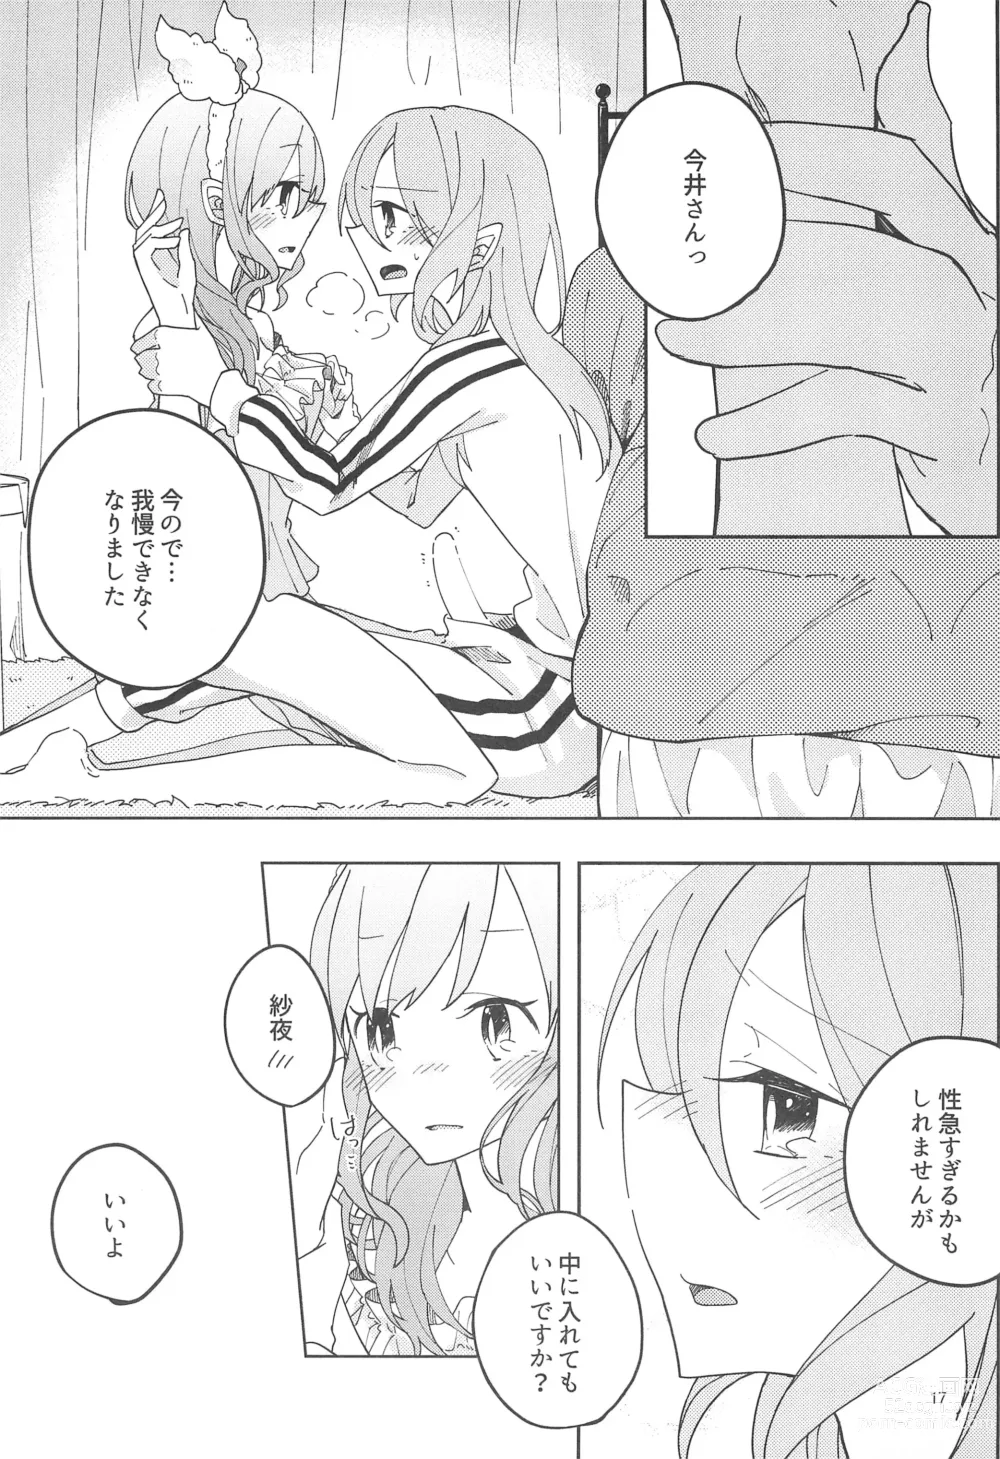 Page 19 of doujinshi I’m crazy about you.